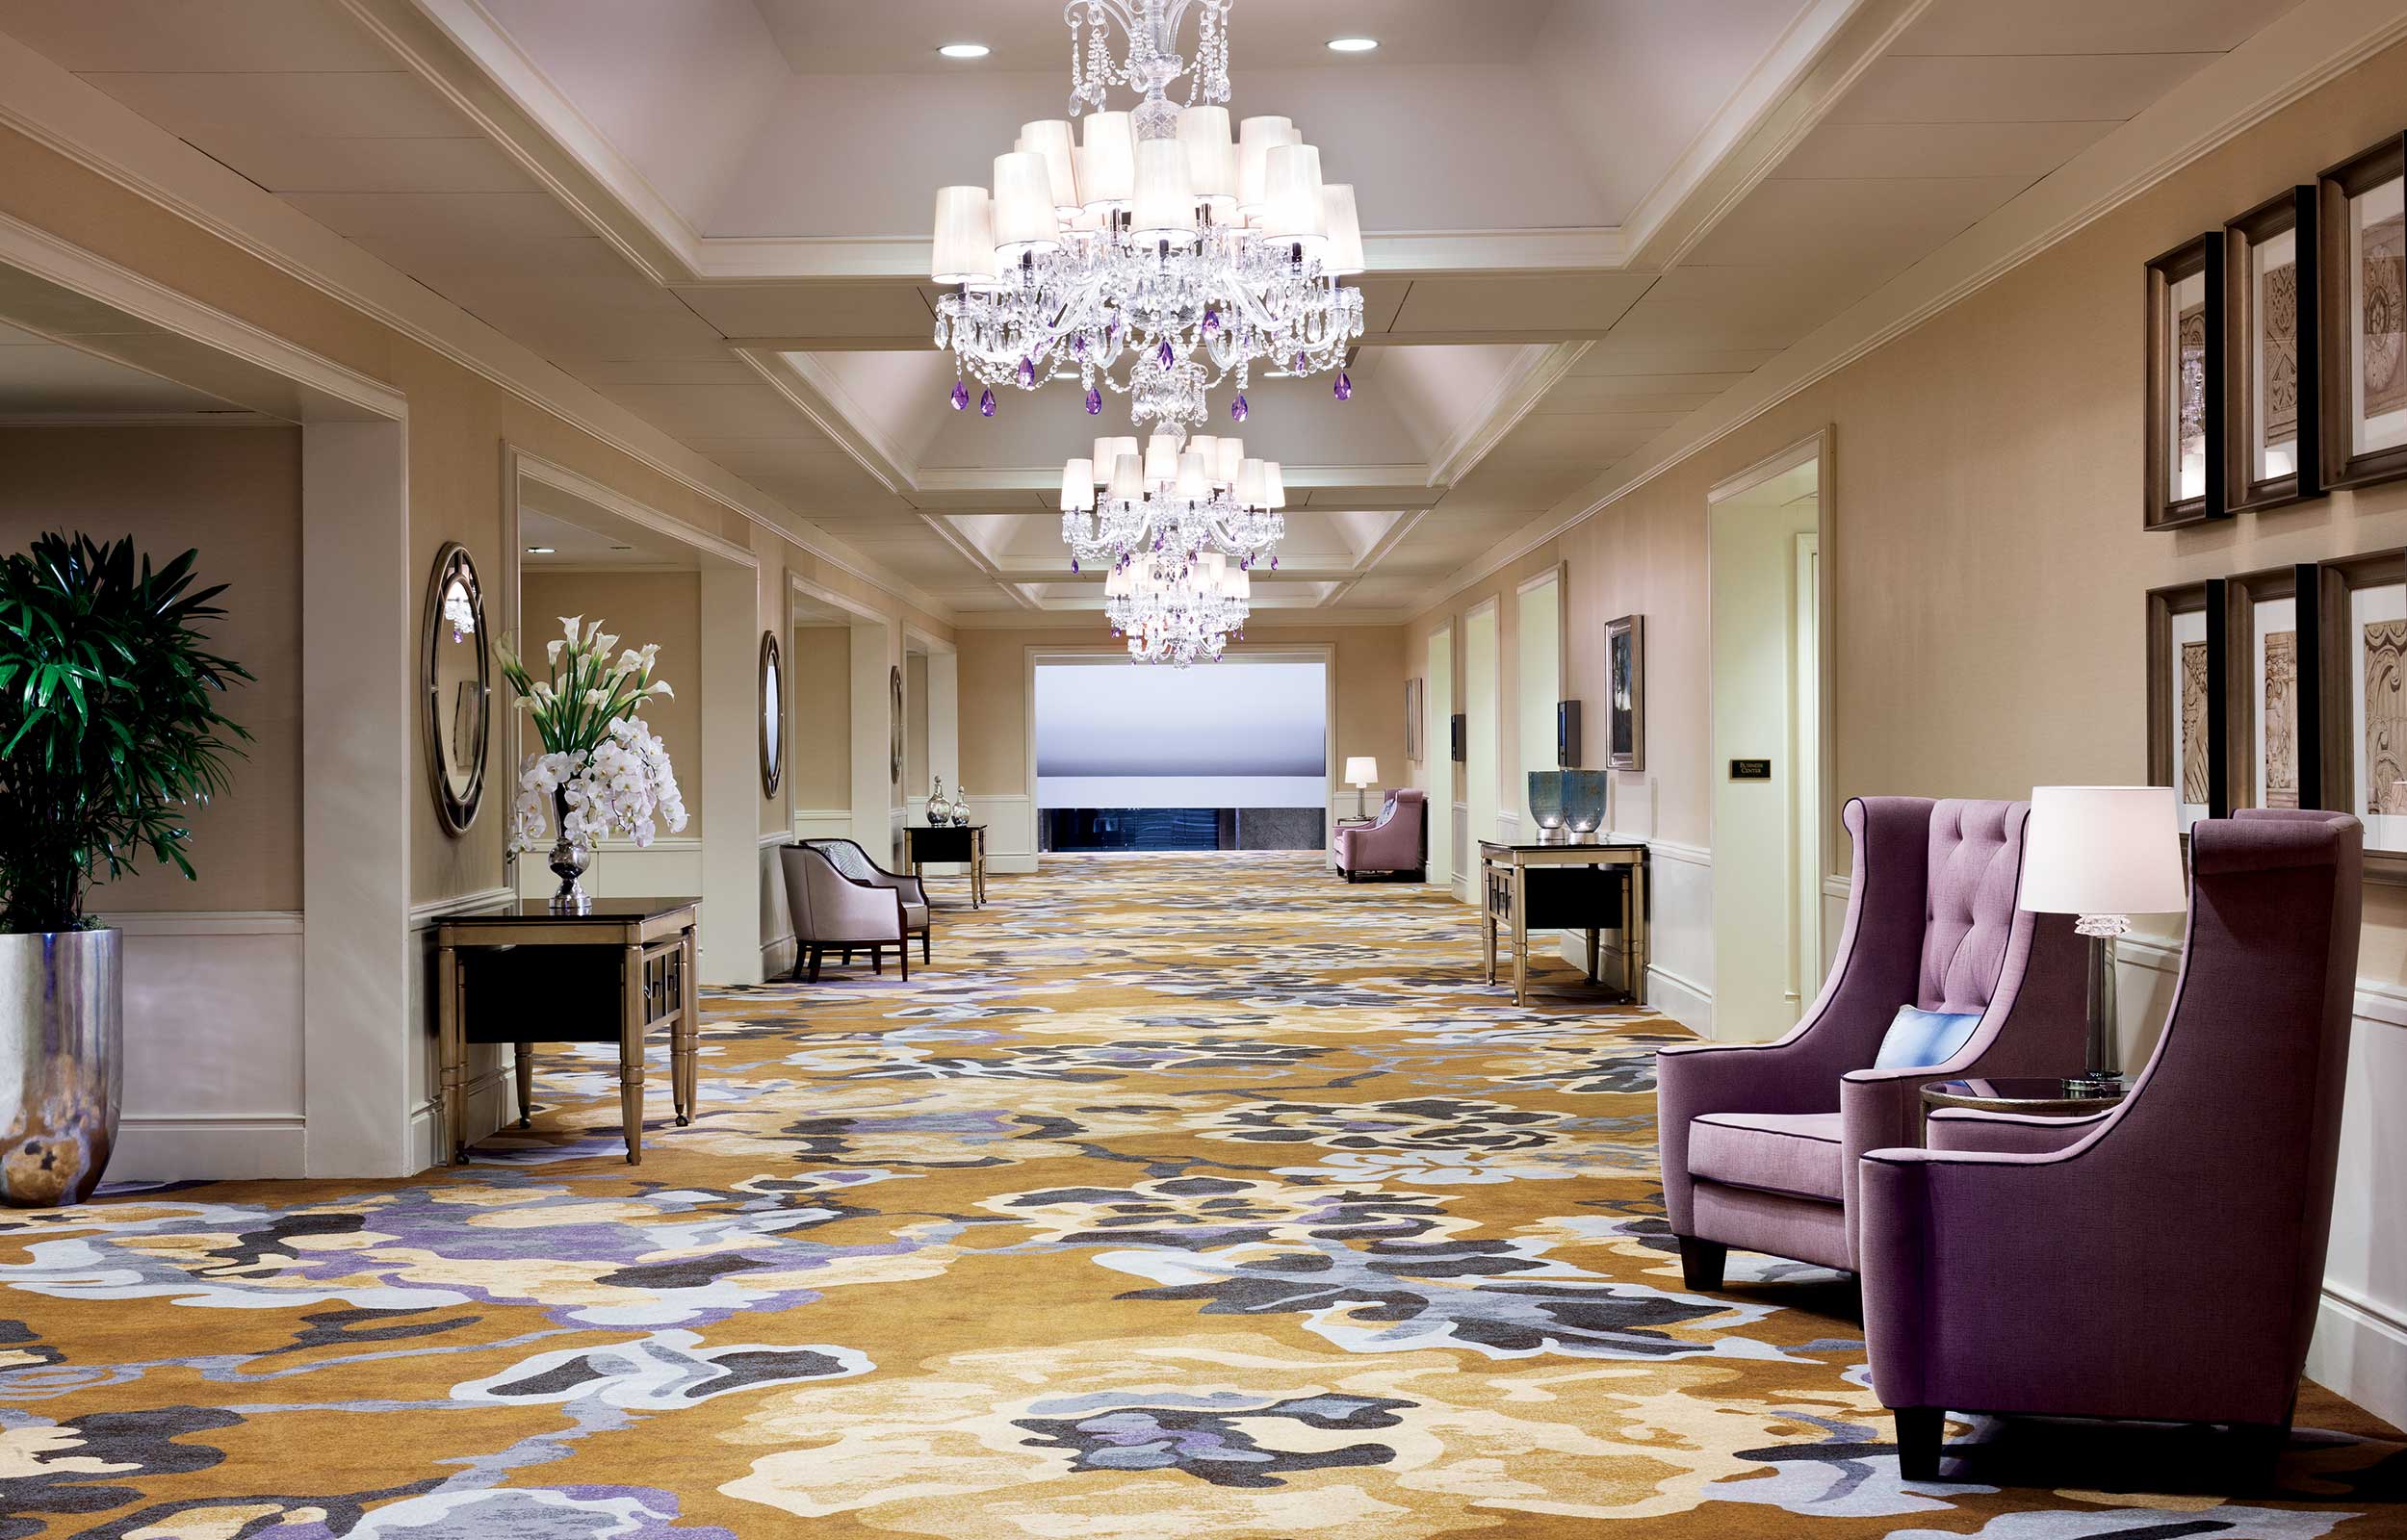 Large hallway with chandeliers and purple seating